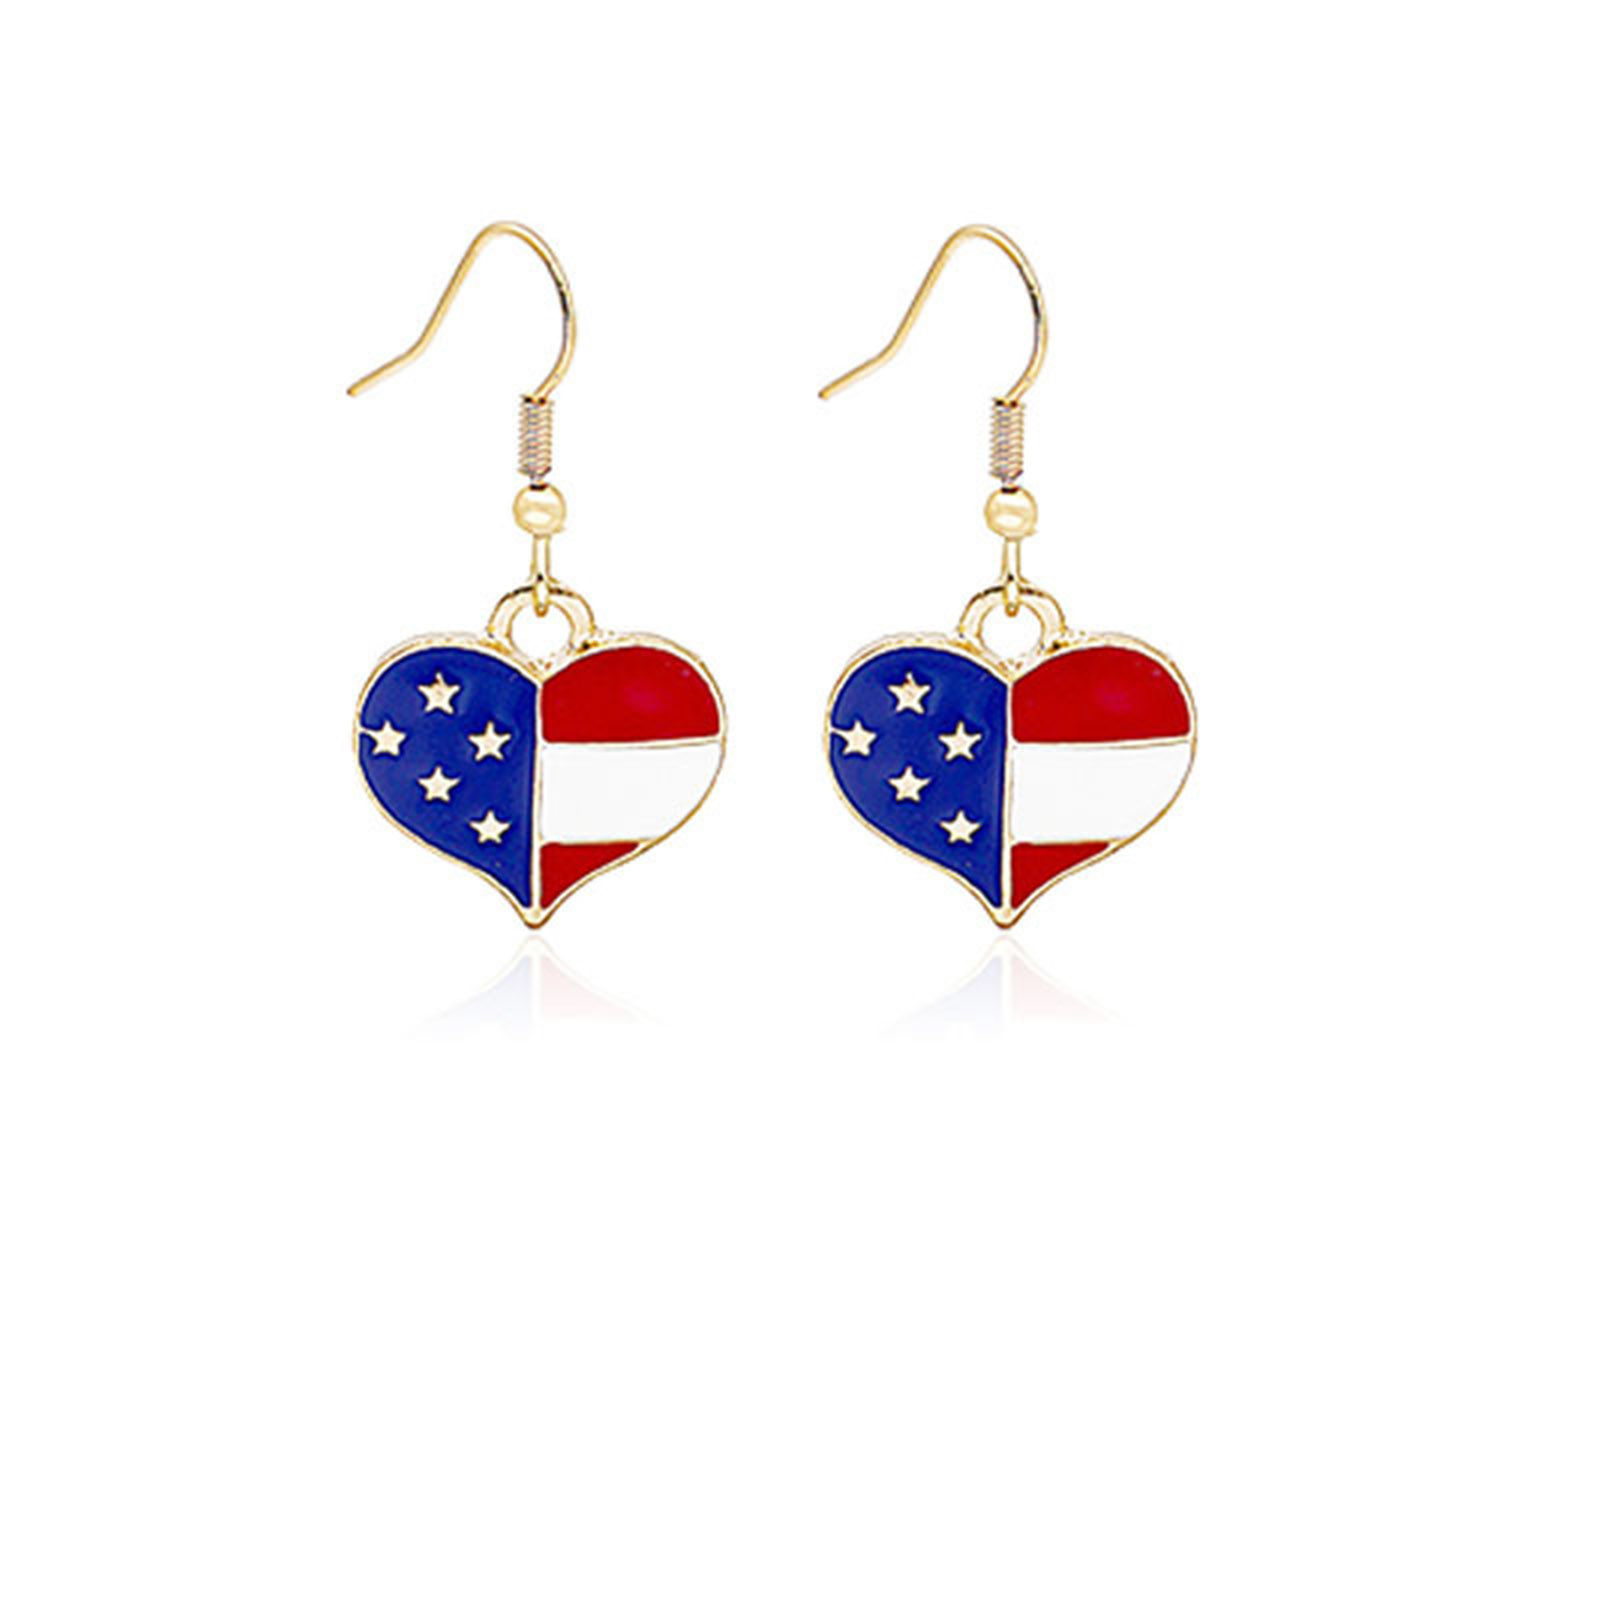 Picture of American Independence Day Ear Wire Hook Earrings Gold Plated Multicolor Heart Flag Of The United States Enamel 22mm x 19mm, 1 Pair